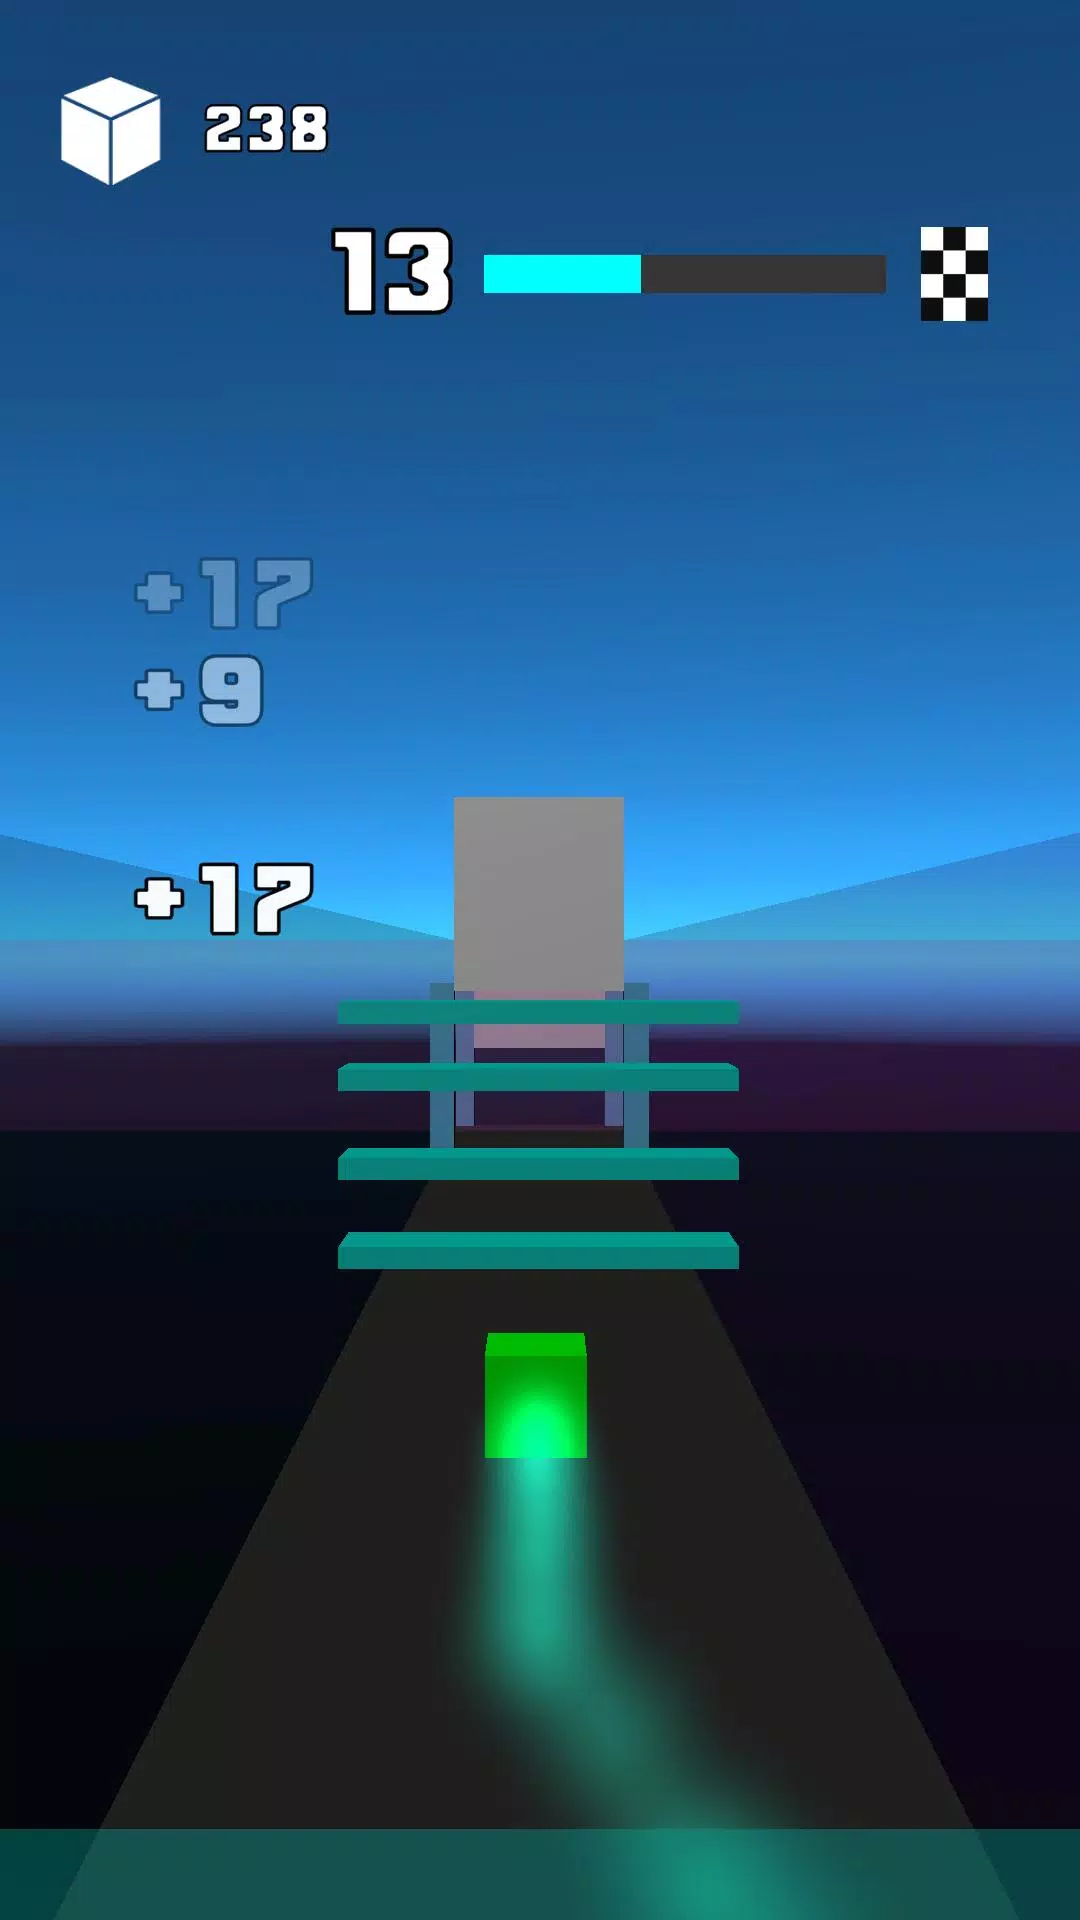 Block Dash APK for Android Download